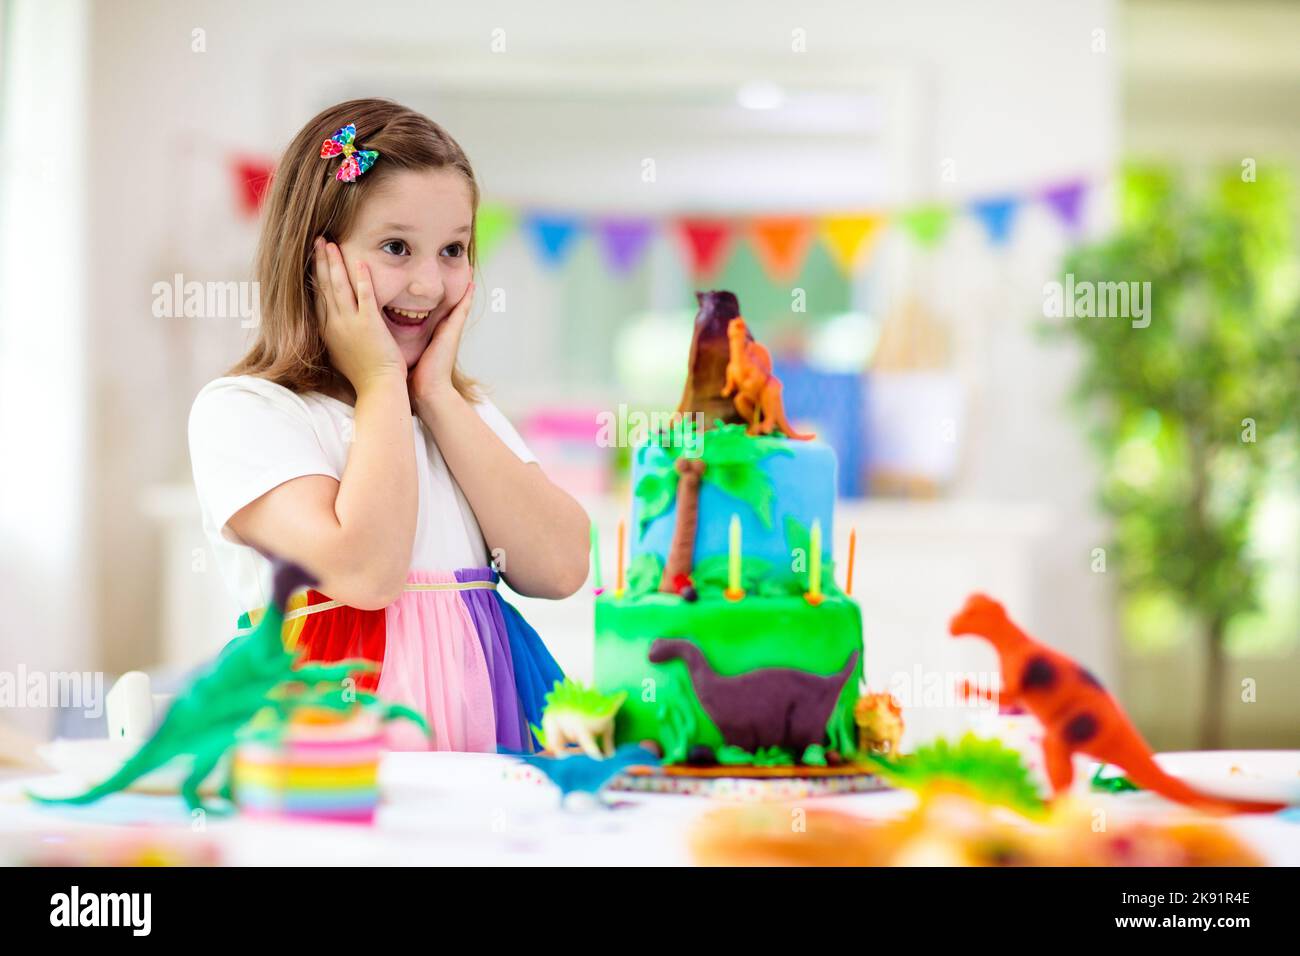 Kids birthday party. Dinosaur theme cake. Little girl blowing candles and opening gifts. Children event. Decoration for dinosaurs themed celebration. Stock Photo